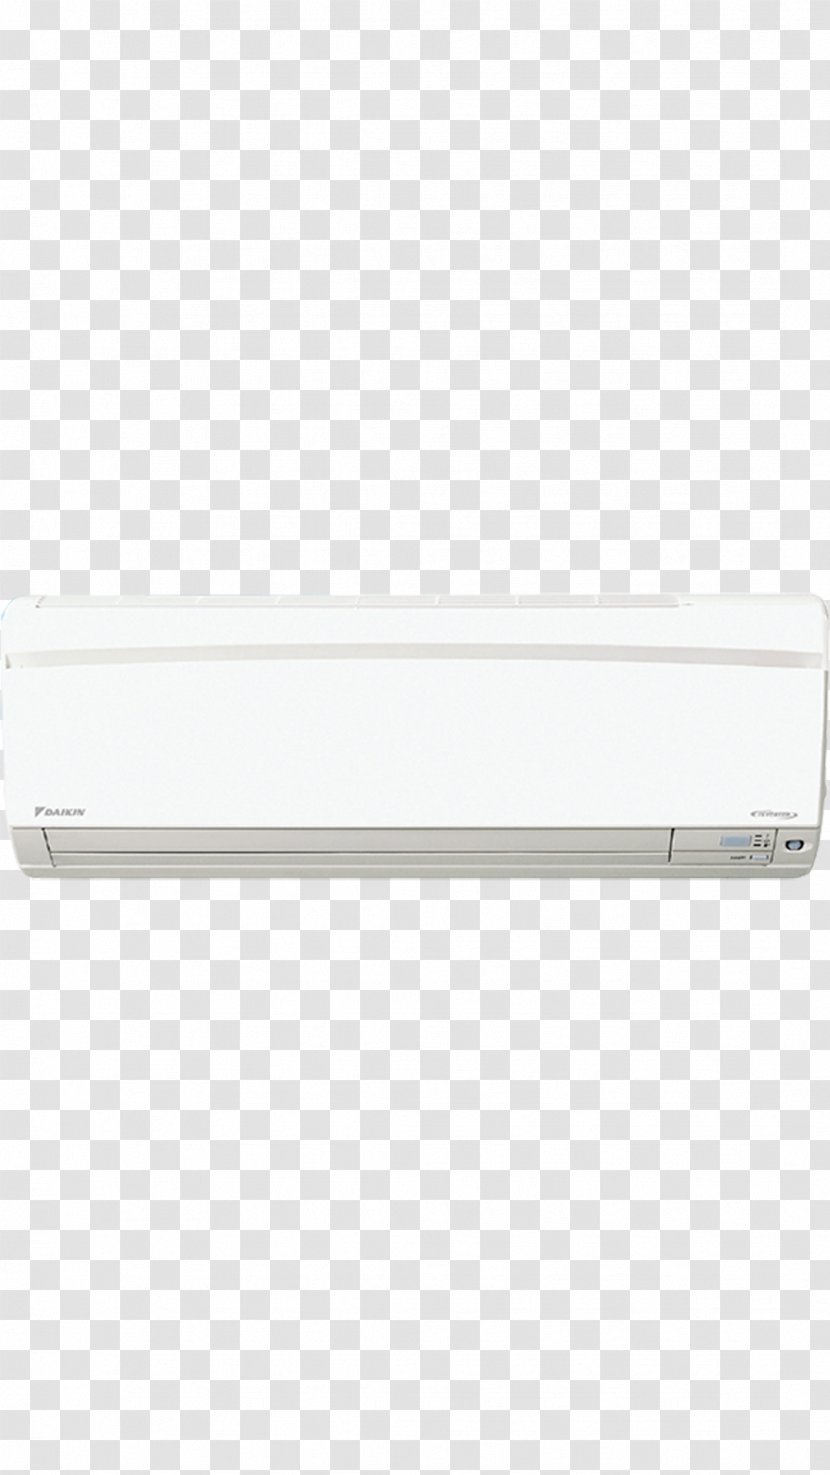 Rectangle - Lighting - Air Conditioner Transparent PNG